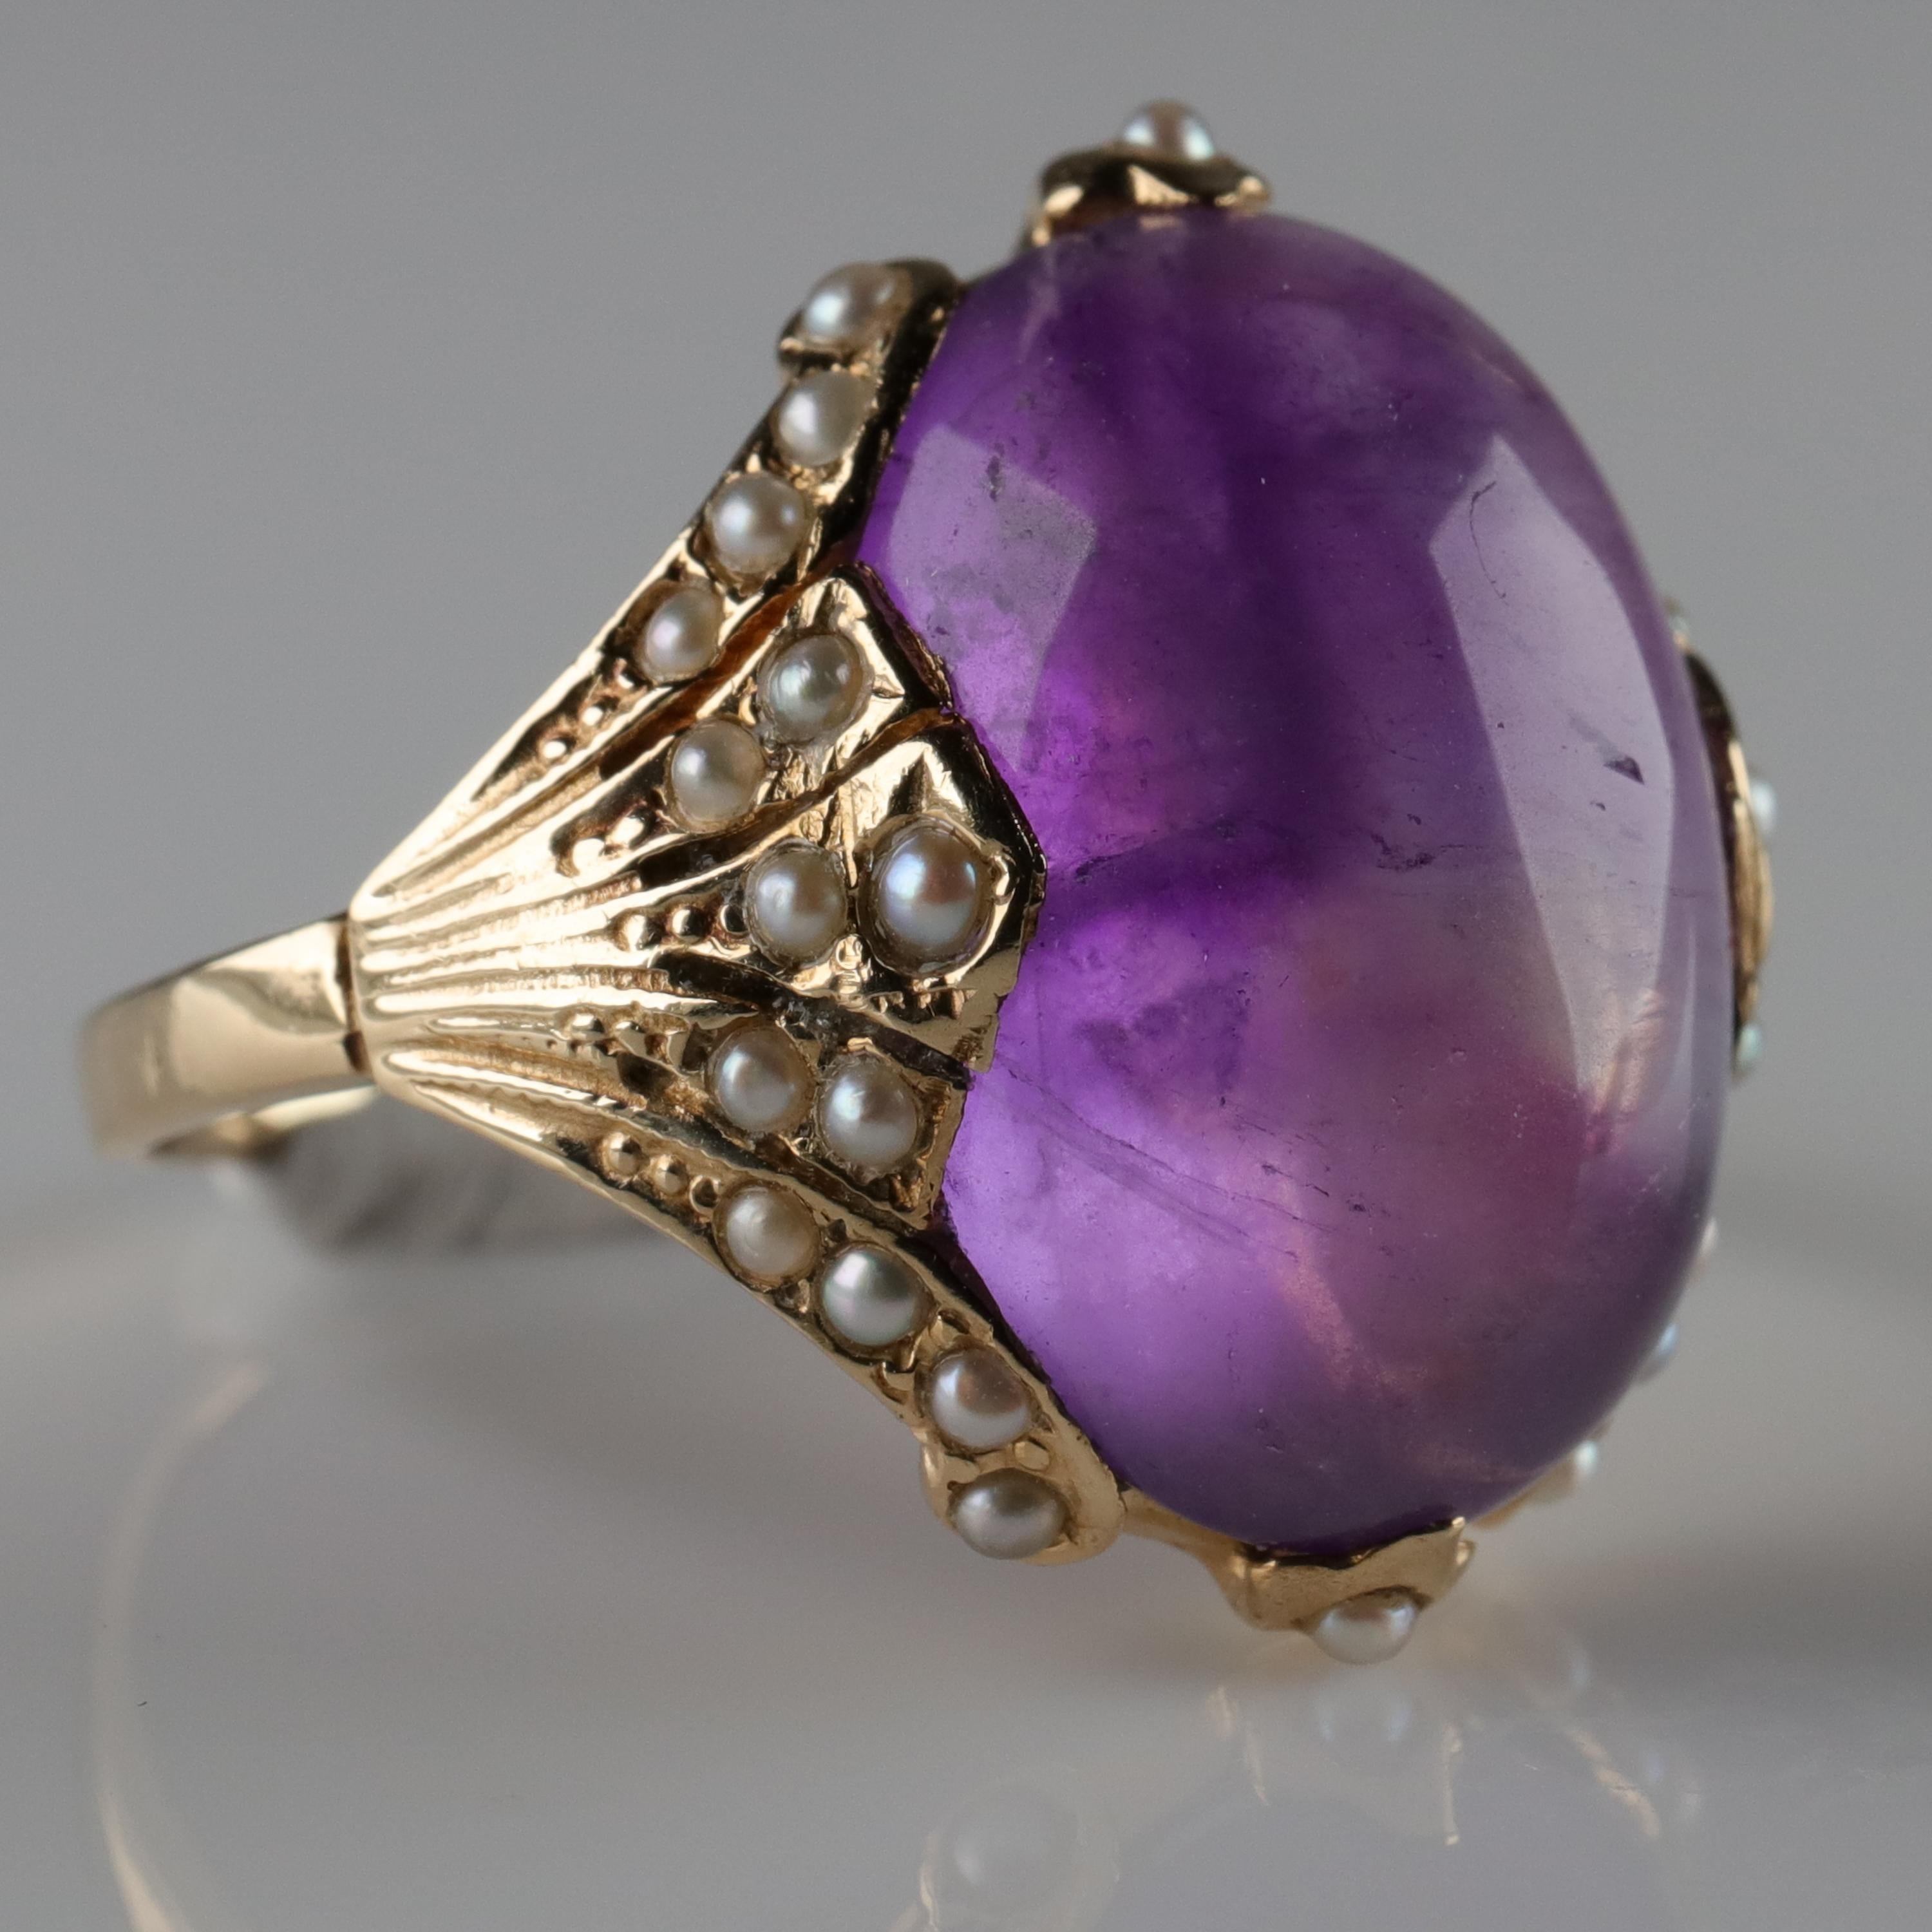 Art Deco Victorian Amethyst Ring for Divination, Scrying, Soothsaying or Just Fashion